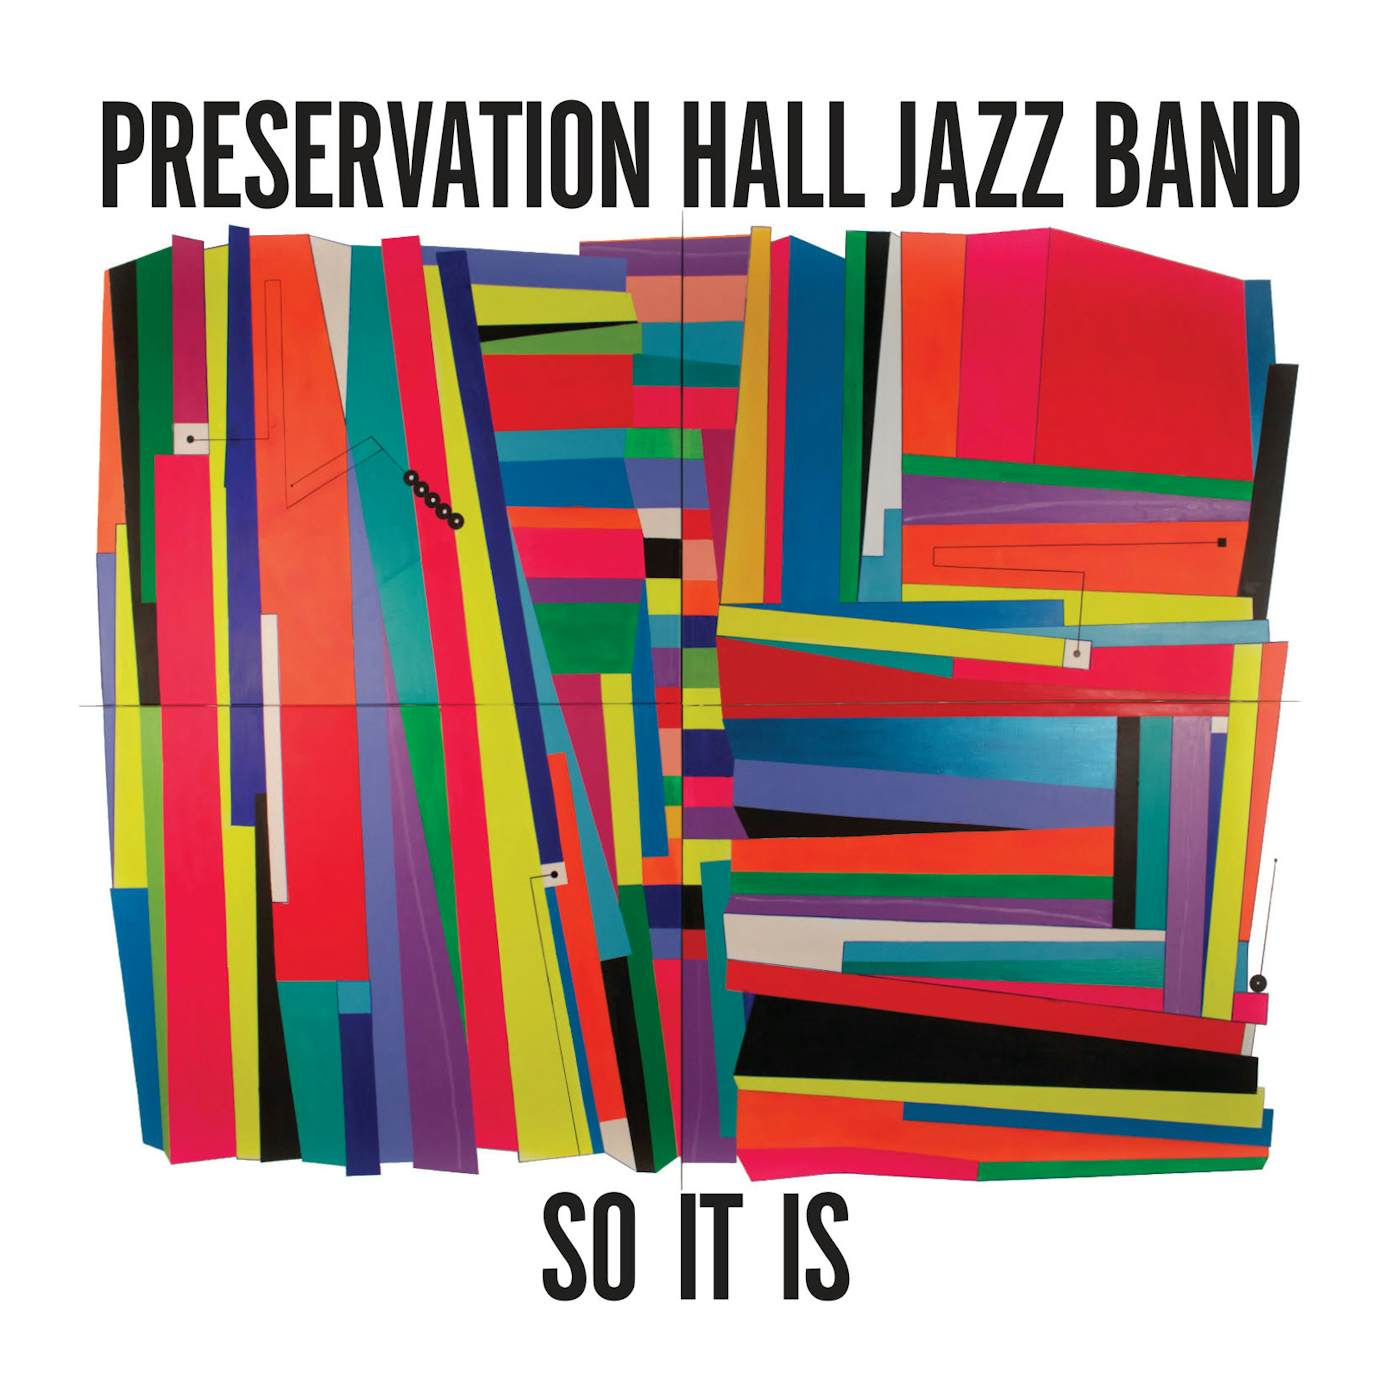 Preservation Hall Jazz Band SO IT IS Vinyl Record